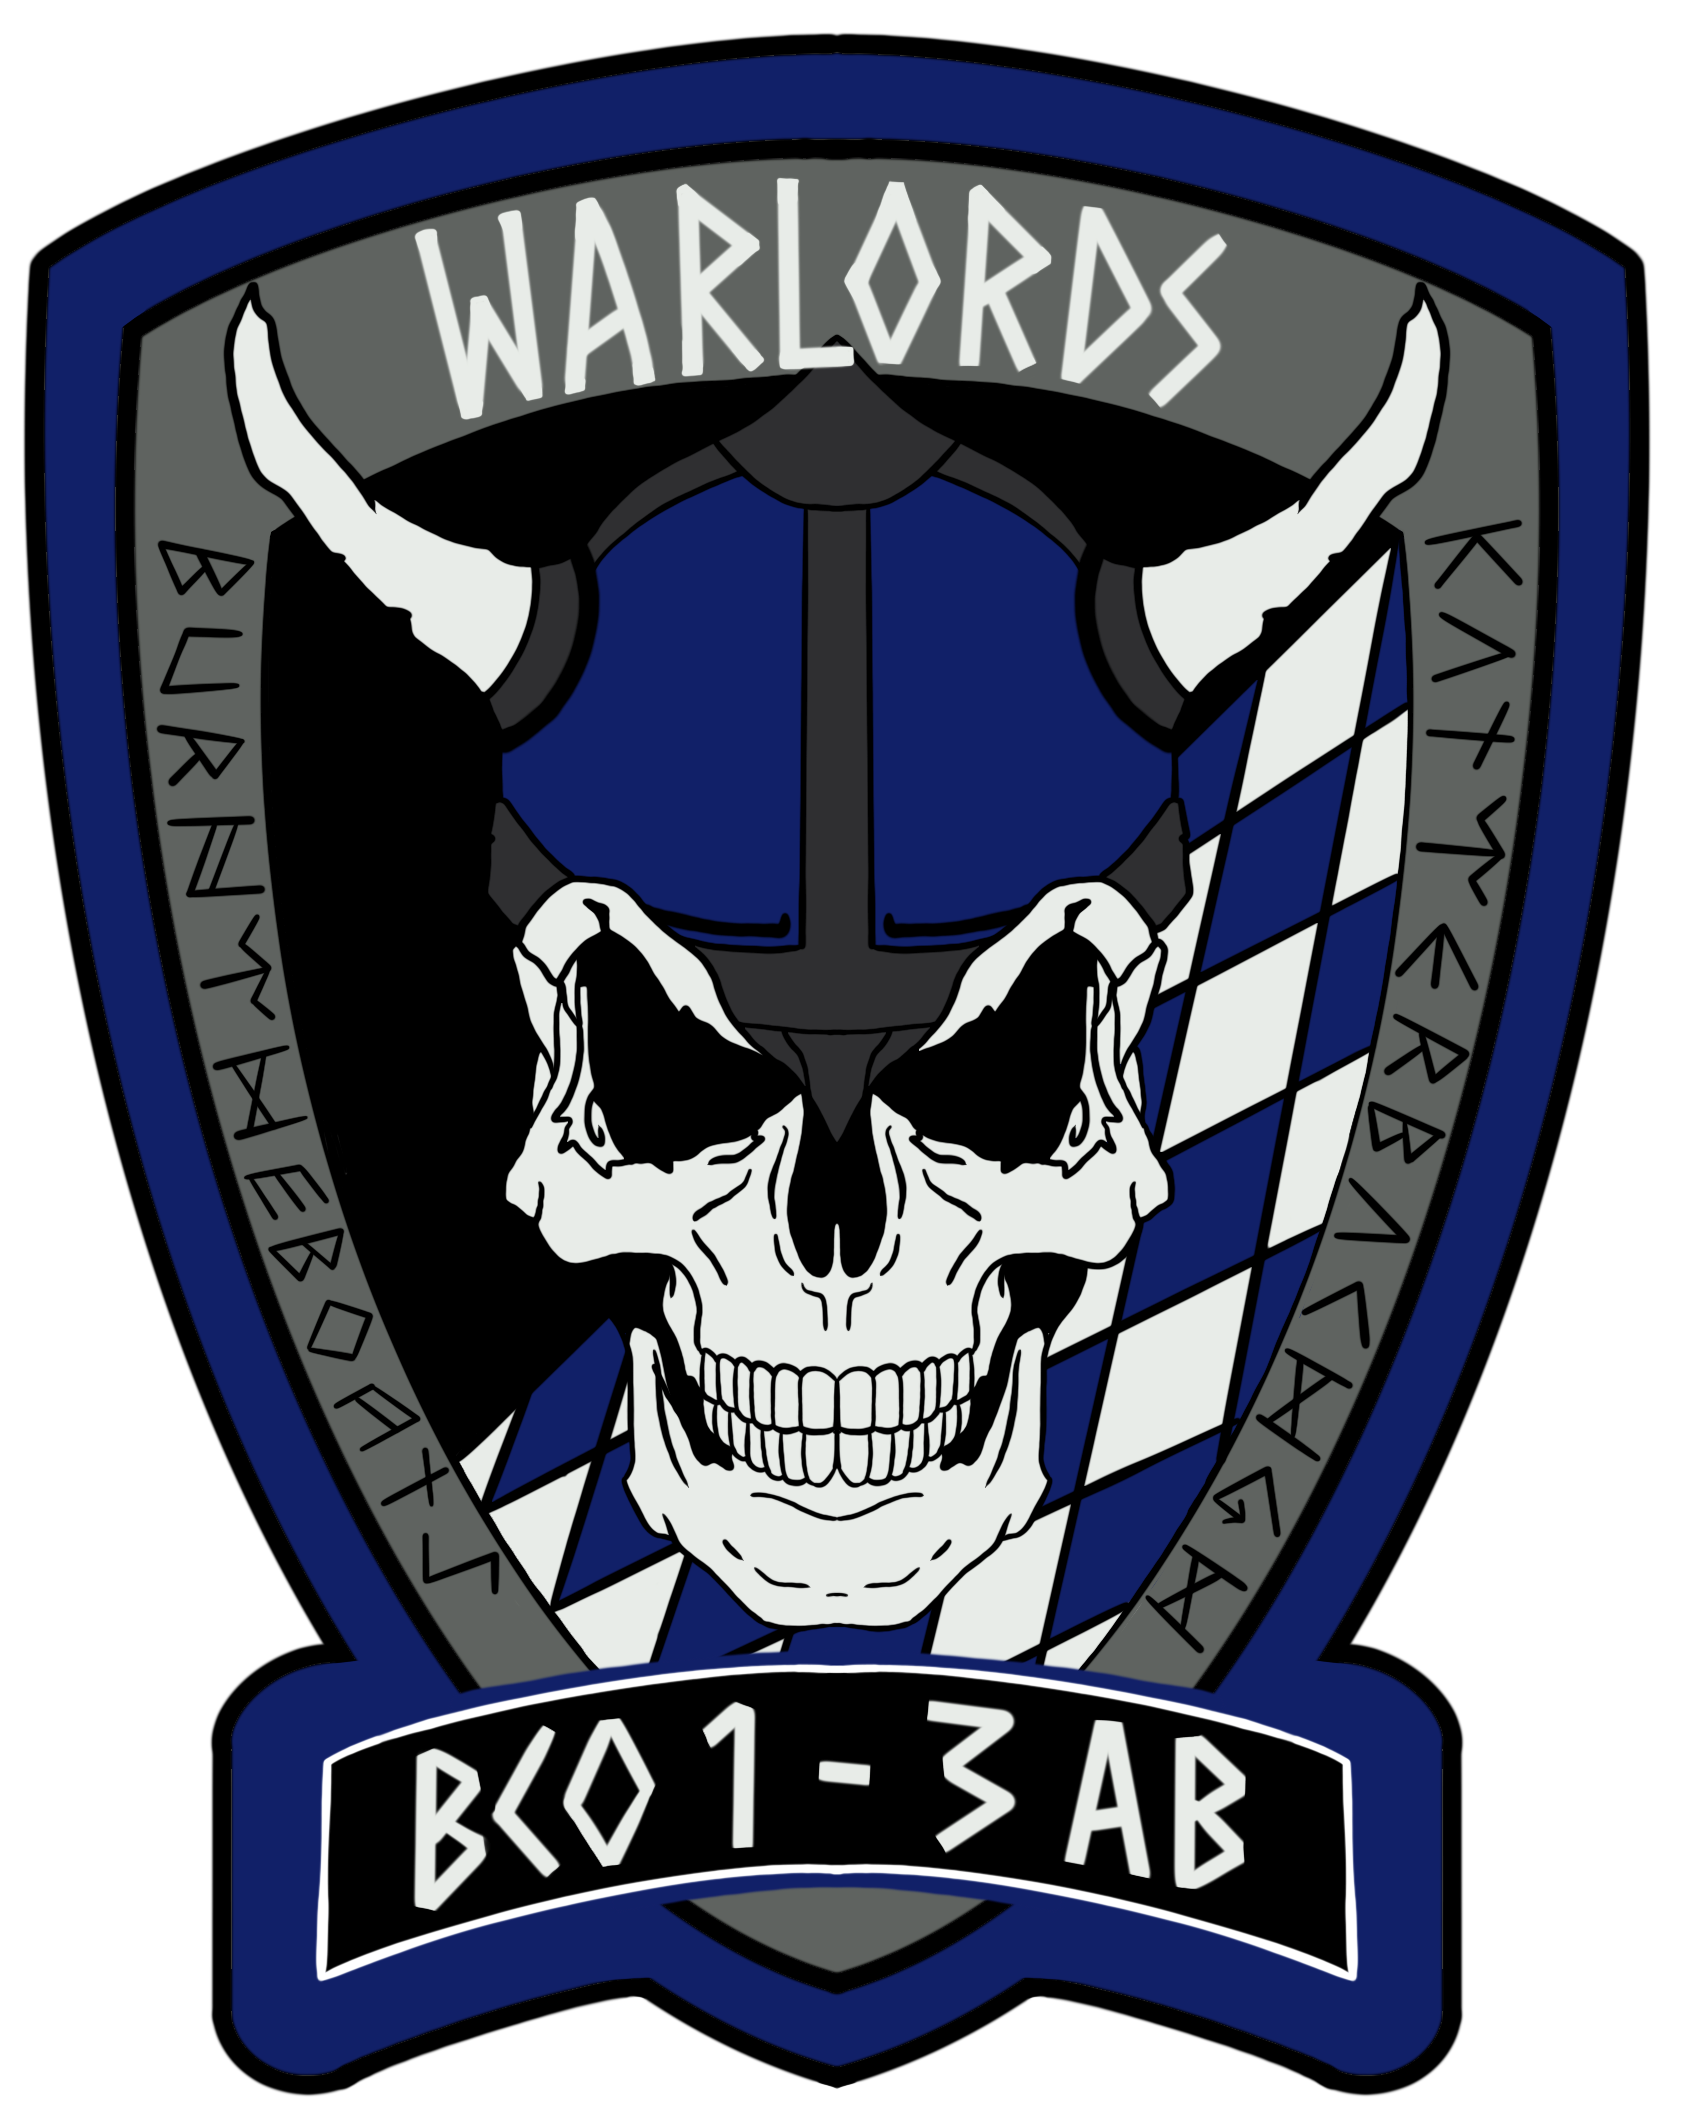 B Co, 1-3 AB "Warlords"